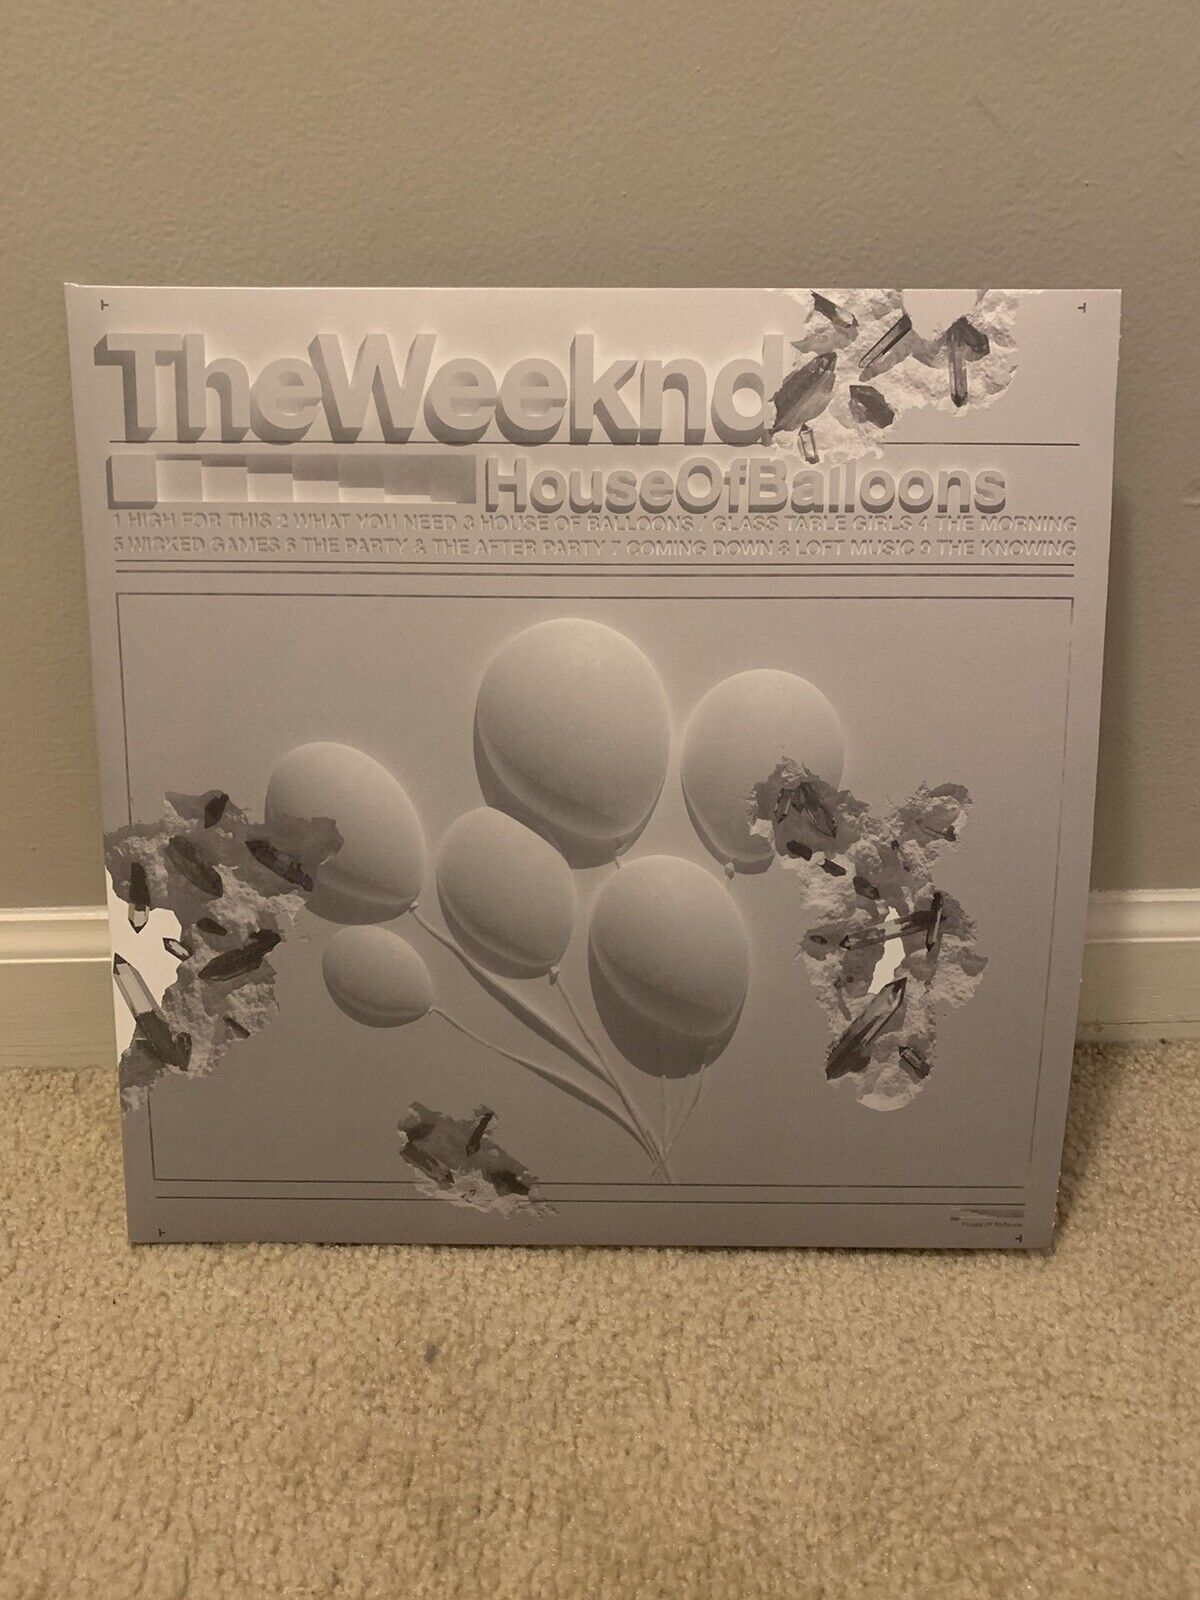 The Weeknd House Of Balloons Clear Vinyl Anniversary Daniel Arsham -Unsealed